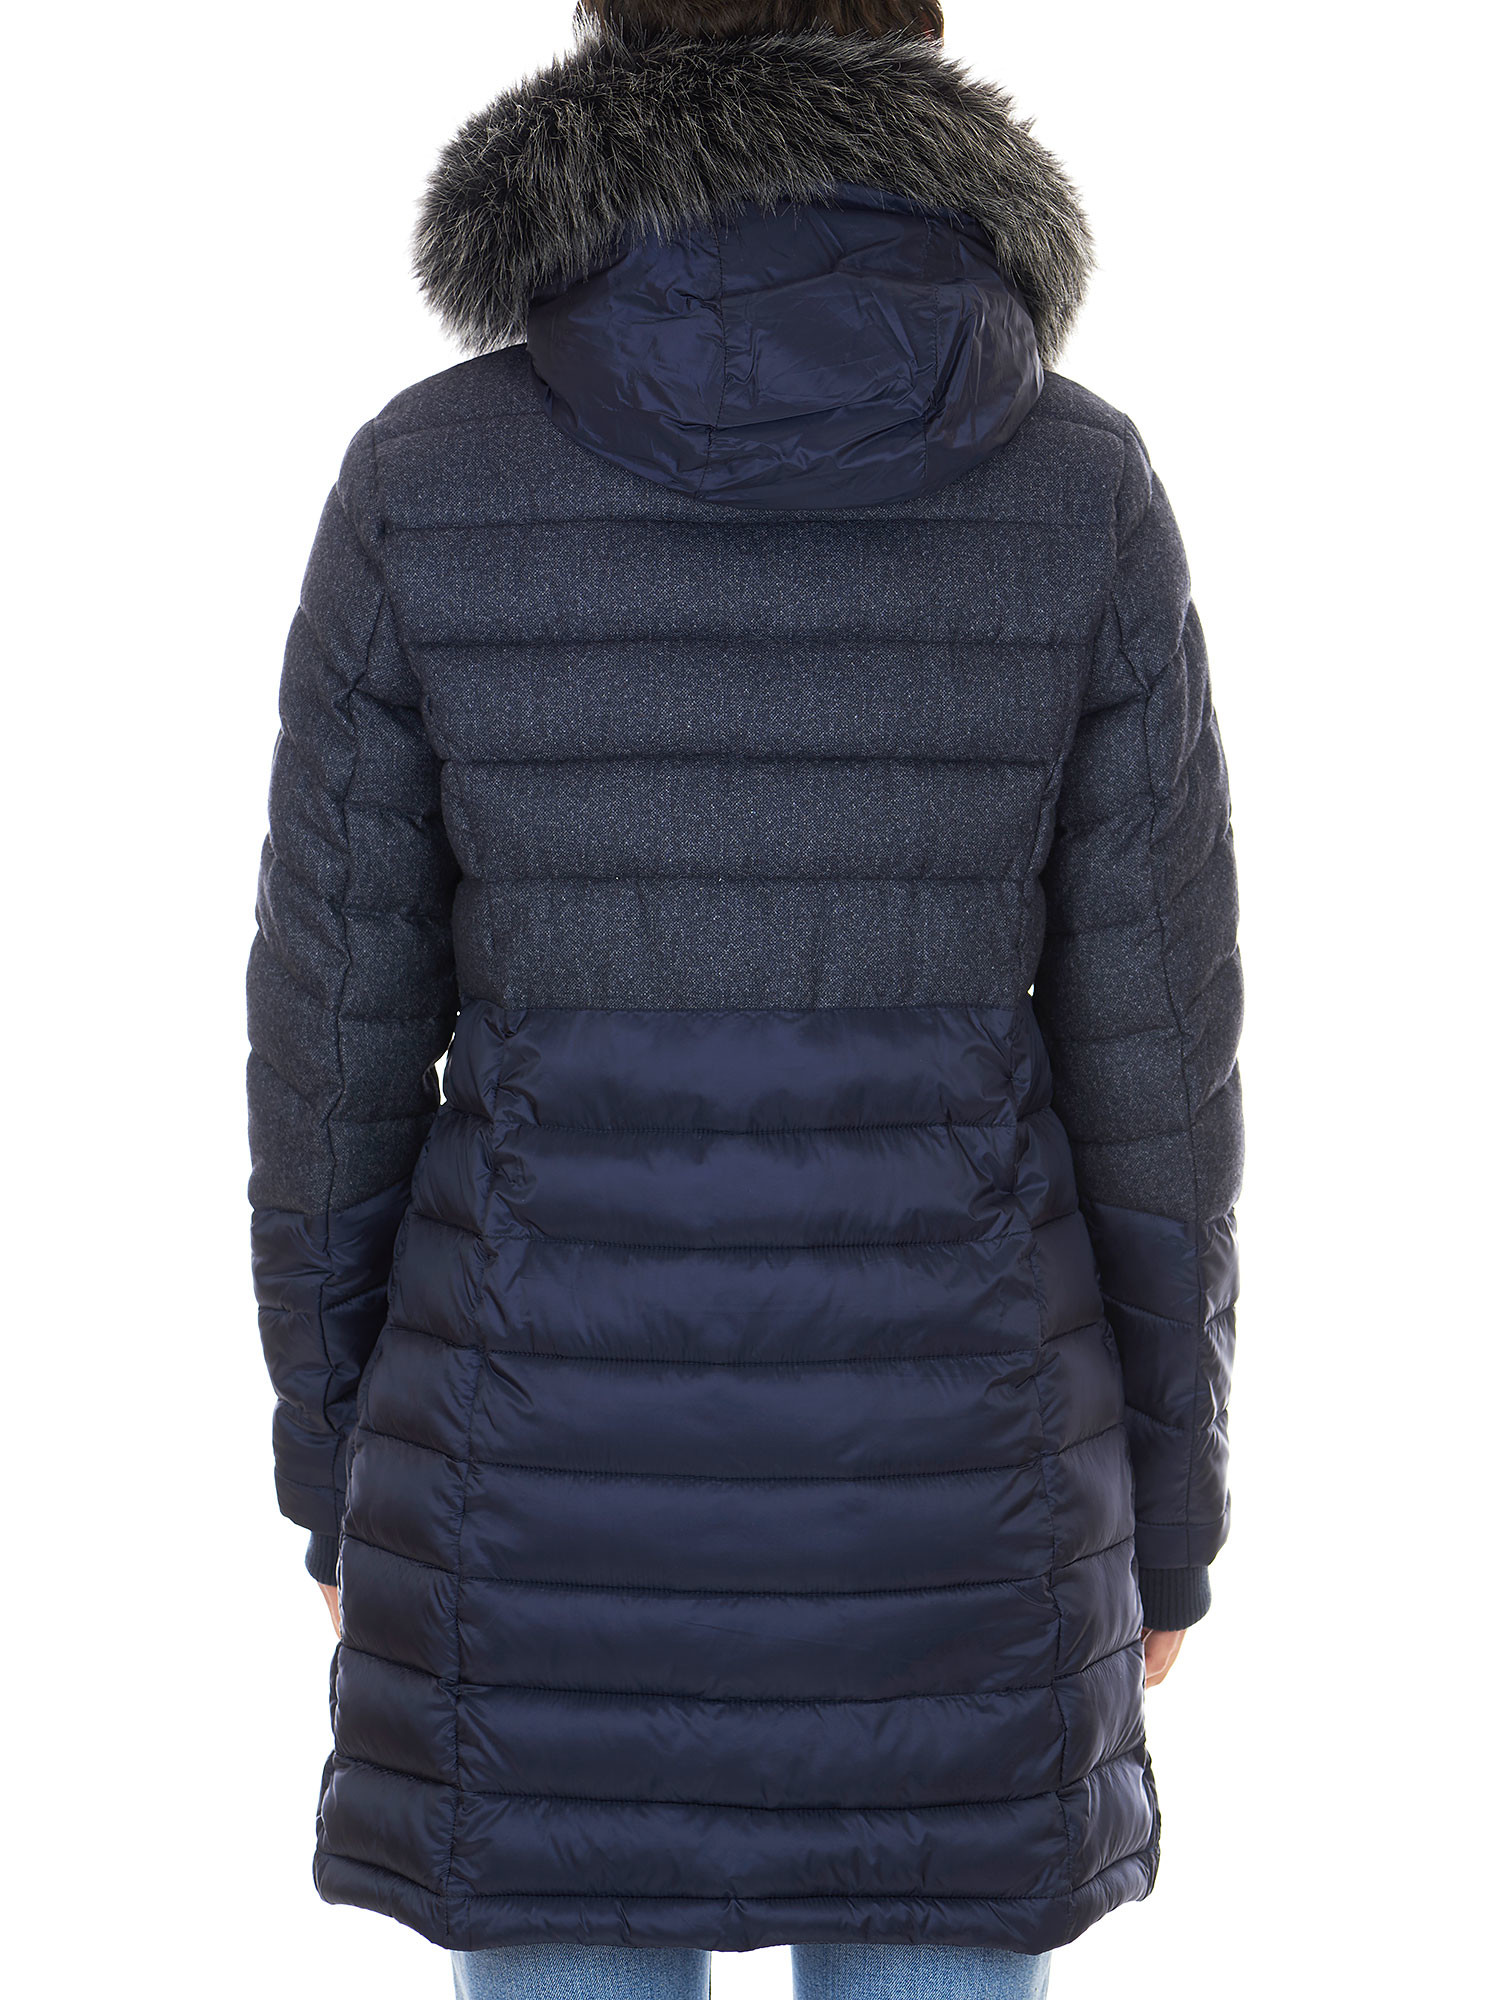 Blue padded jacket for women - Superdry